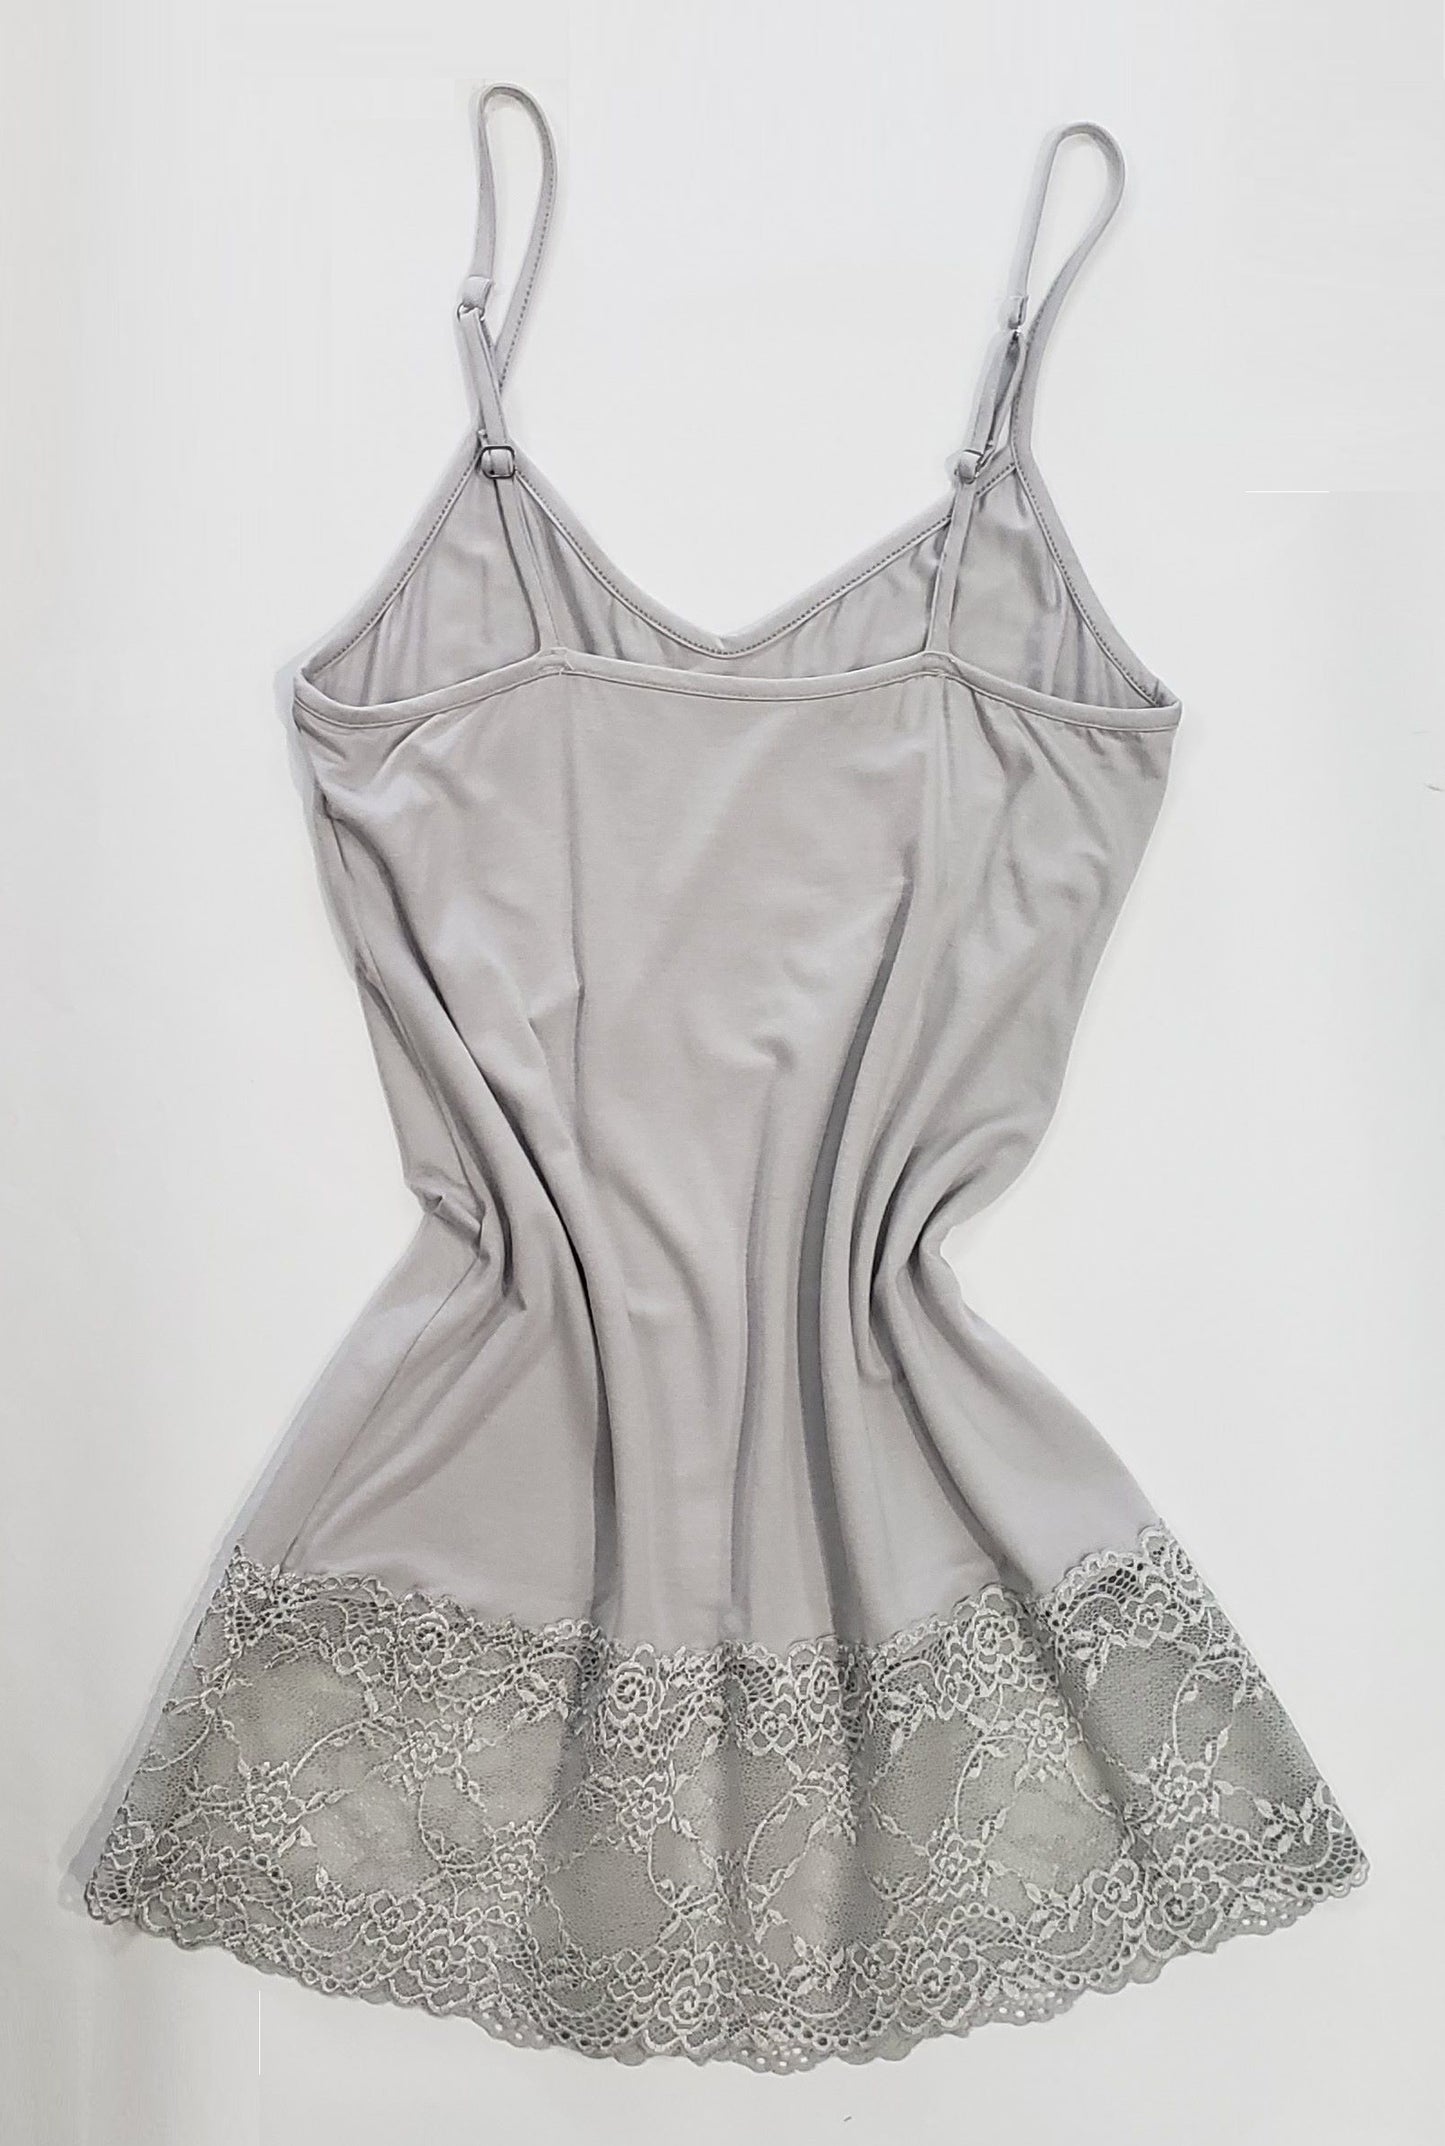 uper-soft babydoll from the Basic line by Andra from Italy.